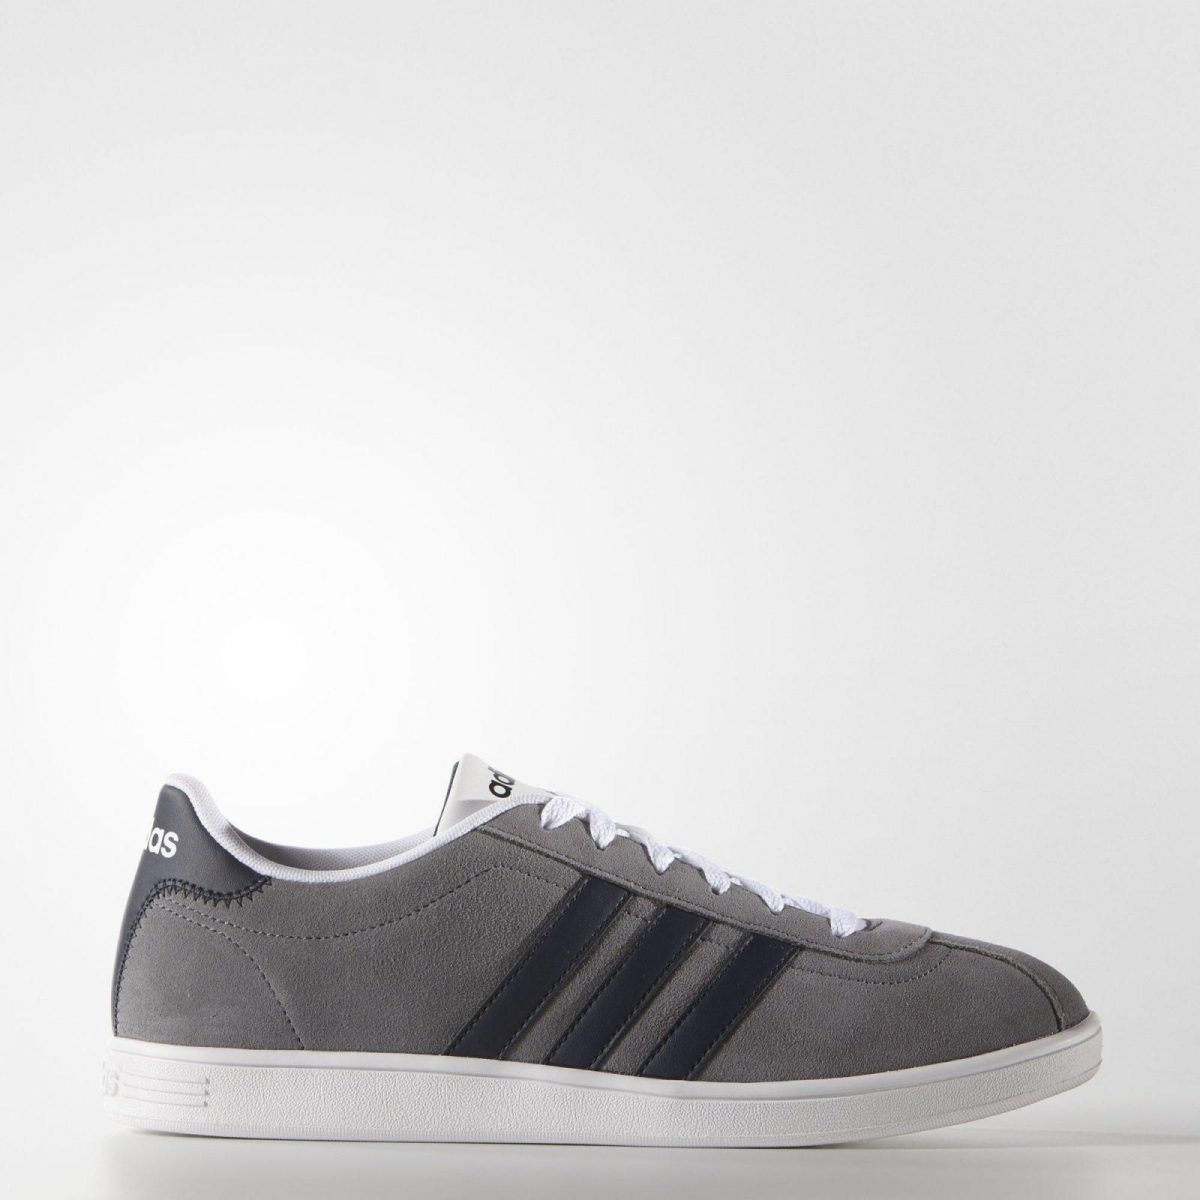 VL Court adidas (F99259) - SNEAKER SEARCH